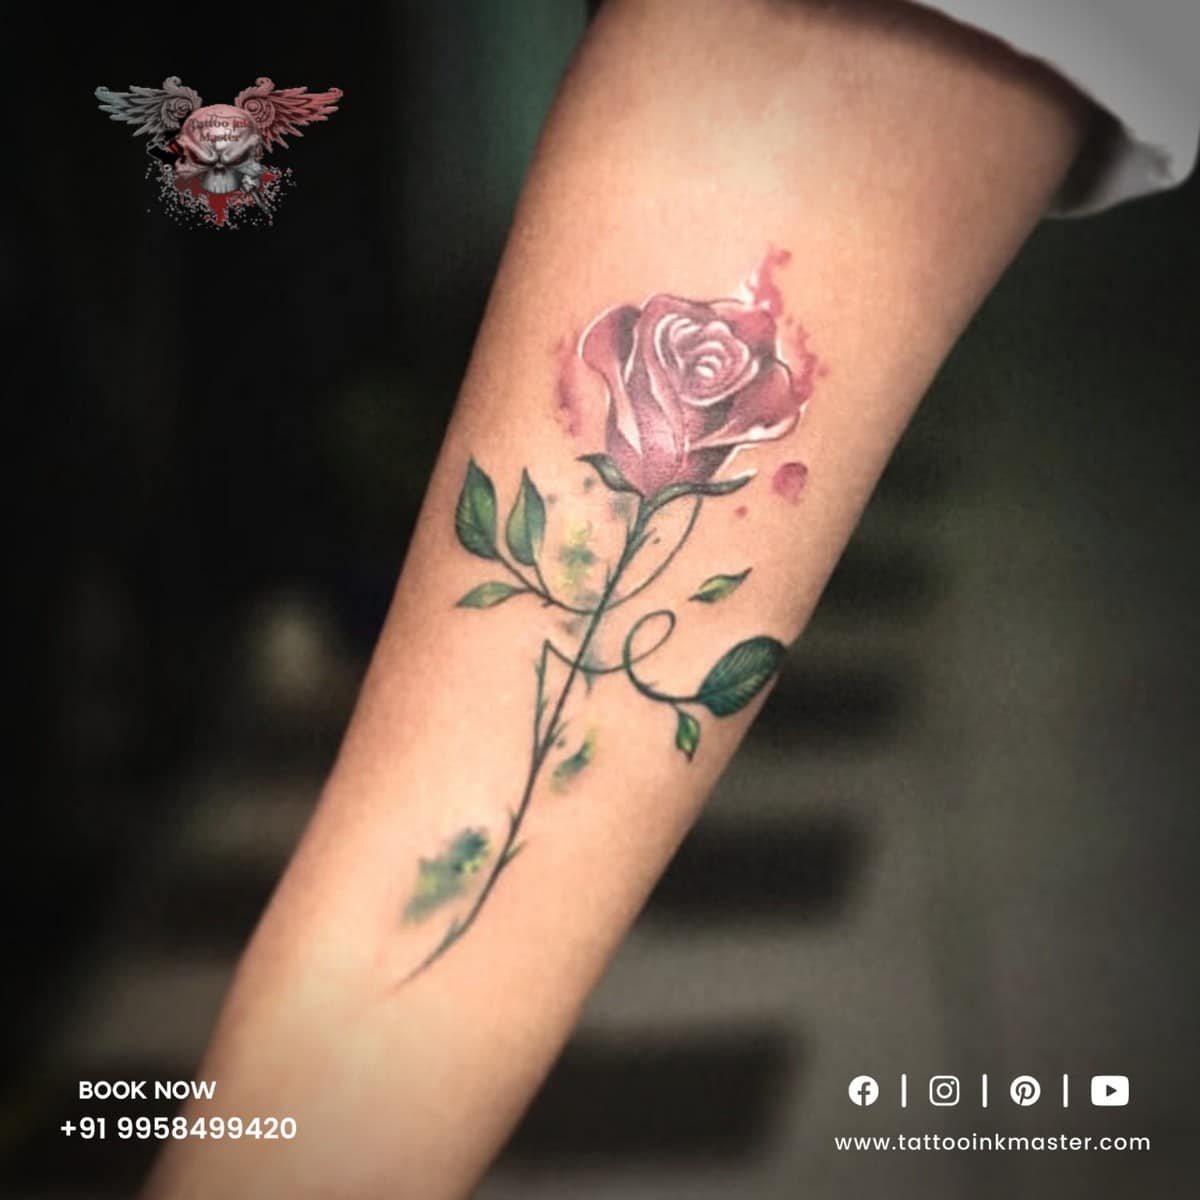 Elegant white rose tattoo done by @katarina.heinze more than a year ago!!  We will never get enough of this gorgeous floral piece!… | Instagram